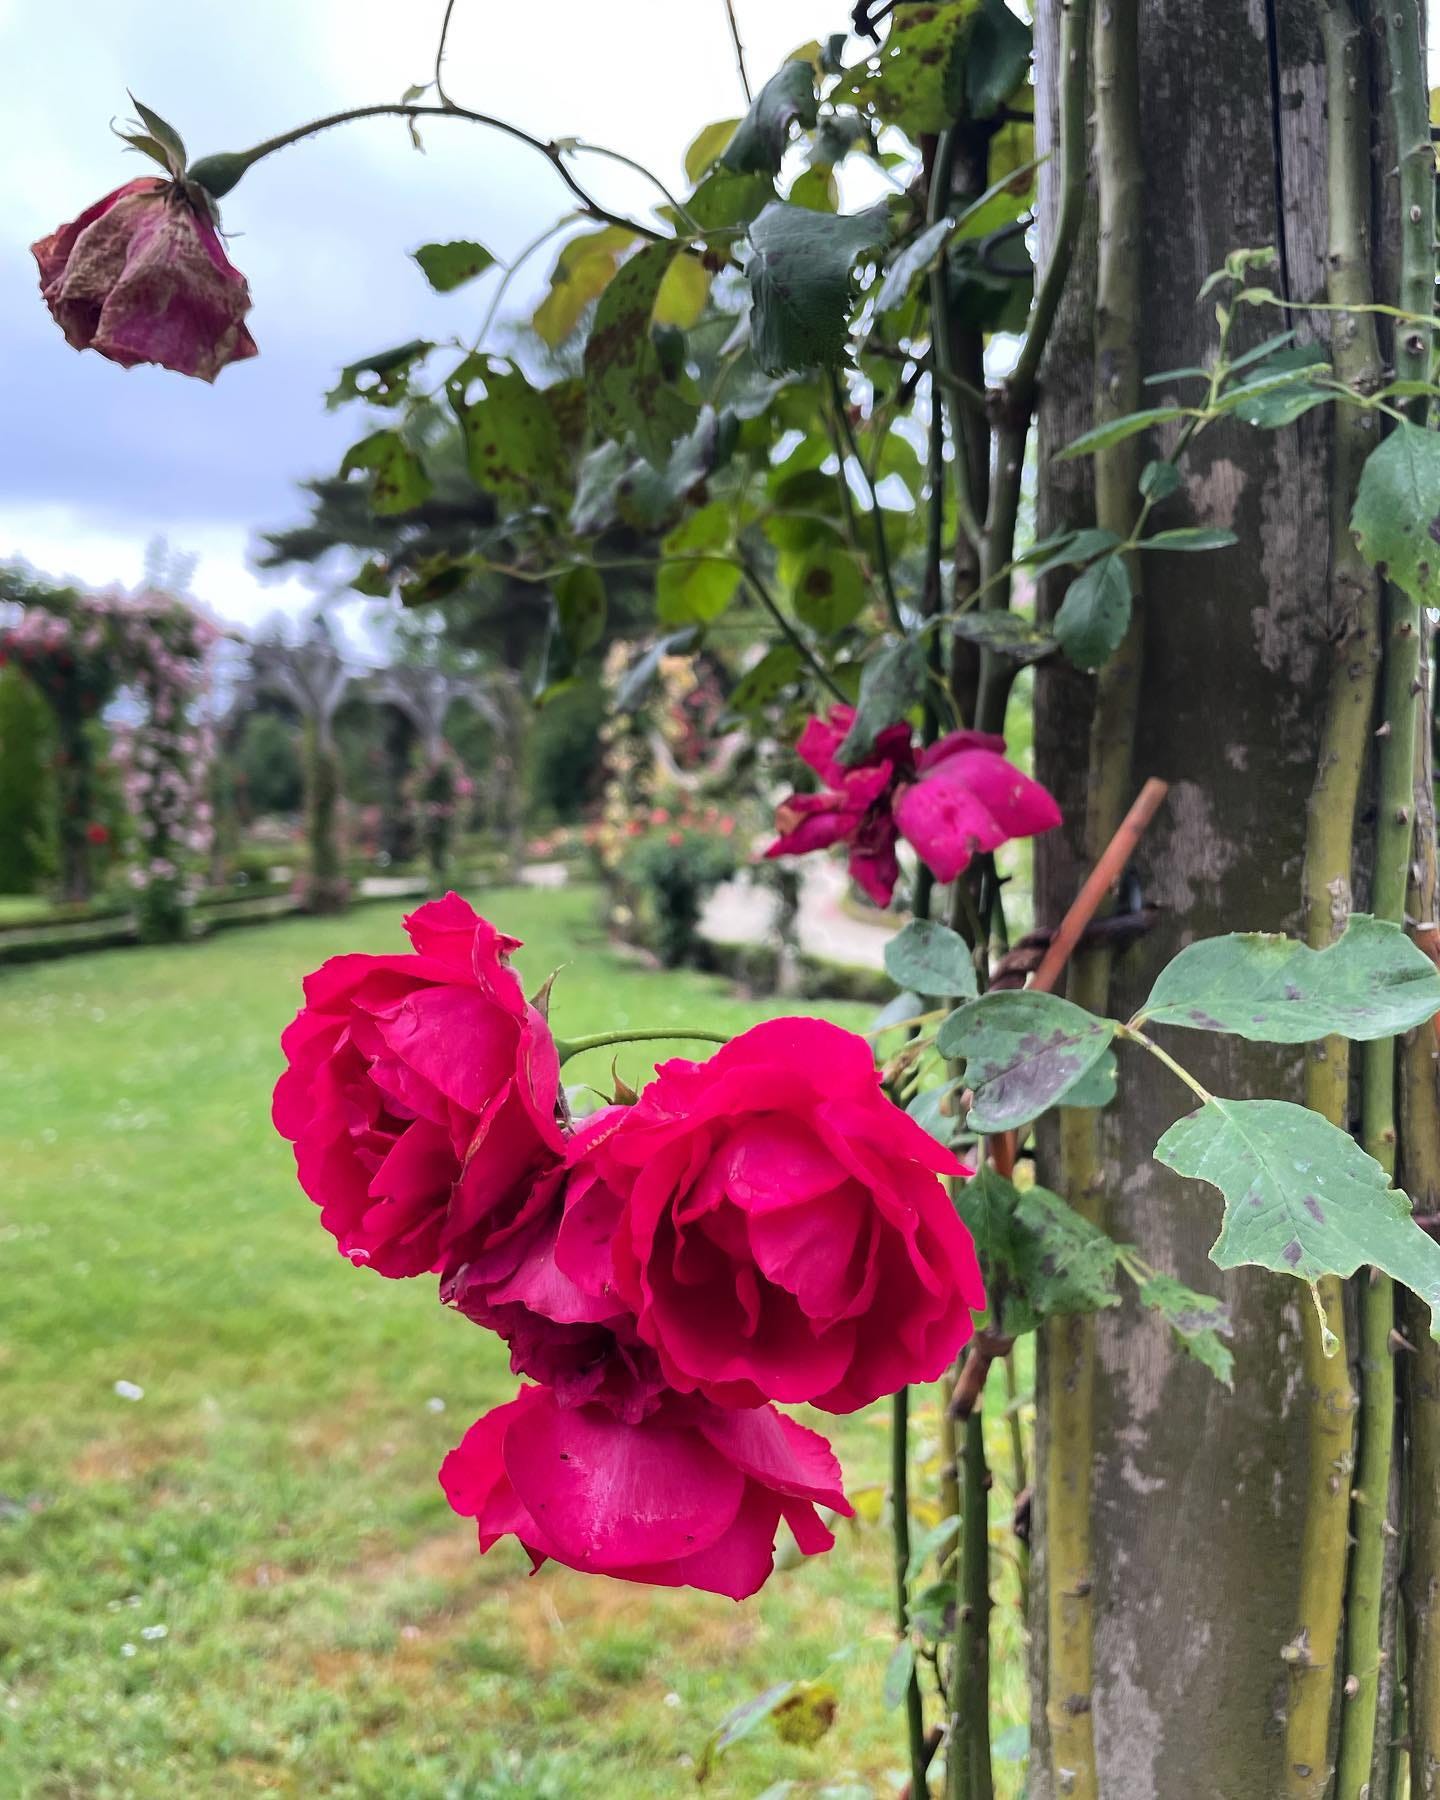 Pink roses are depicted outdoors. They are in varying stages of decay. The top roses are wilted, whereas the cluster of roses on the bottom are bright pink. Their stems climb and wind around a trunk-like trellis.